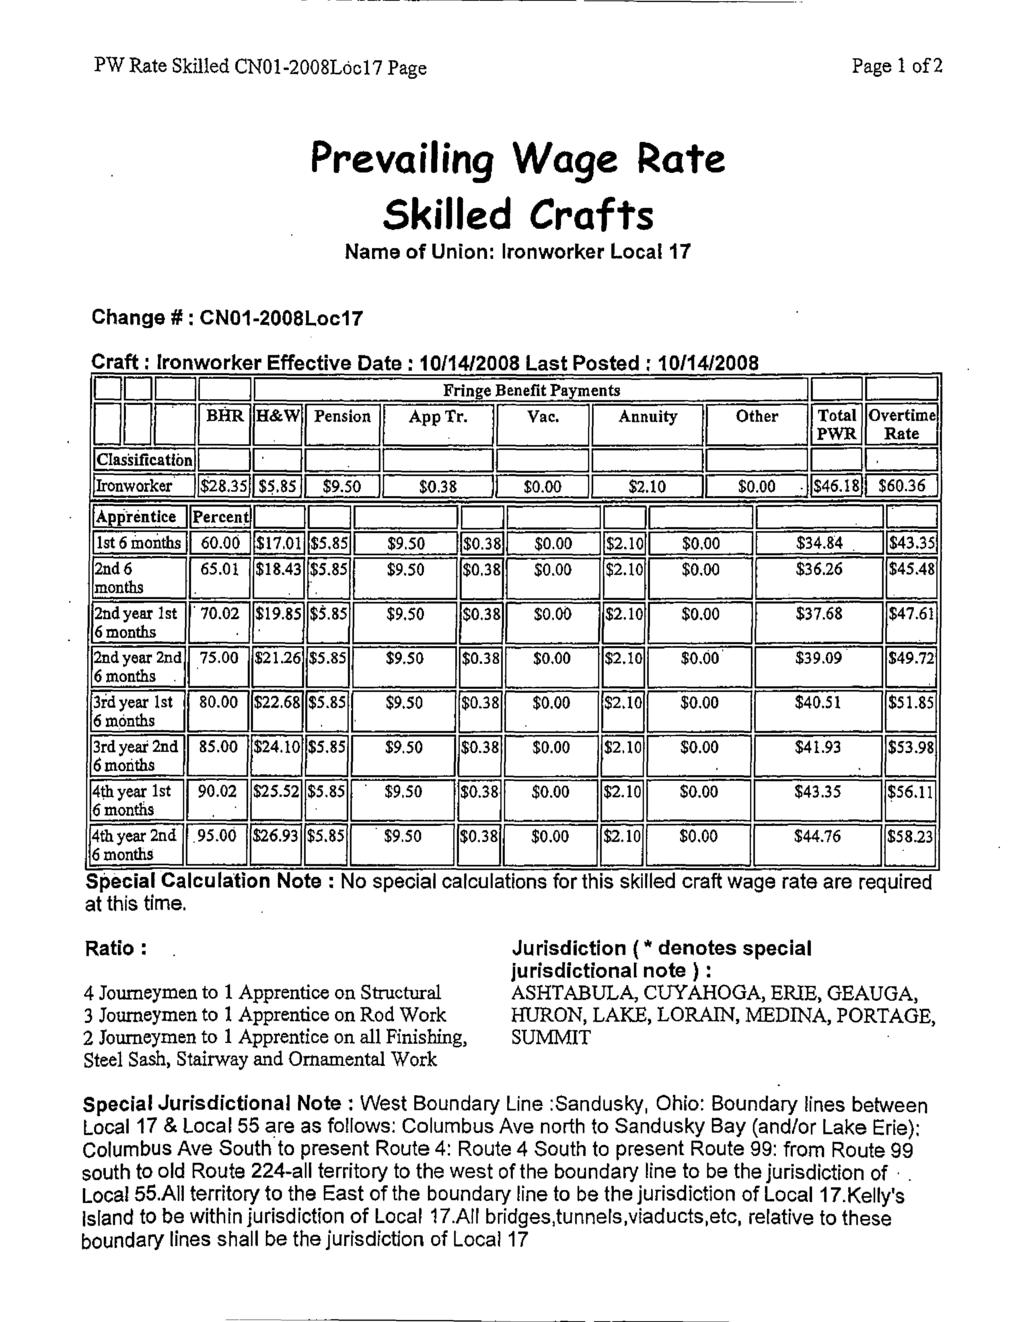 PW Rate Skilled CNO1-2008LOc17 Page Page 1 of 2 Prevailing Wage Rate Skilled Crafts Name of Union: Ironworker Local 17 Change #: CN01-2008Loc17 Craft Ironworker Effective Date : 1011412008 Last